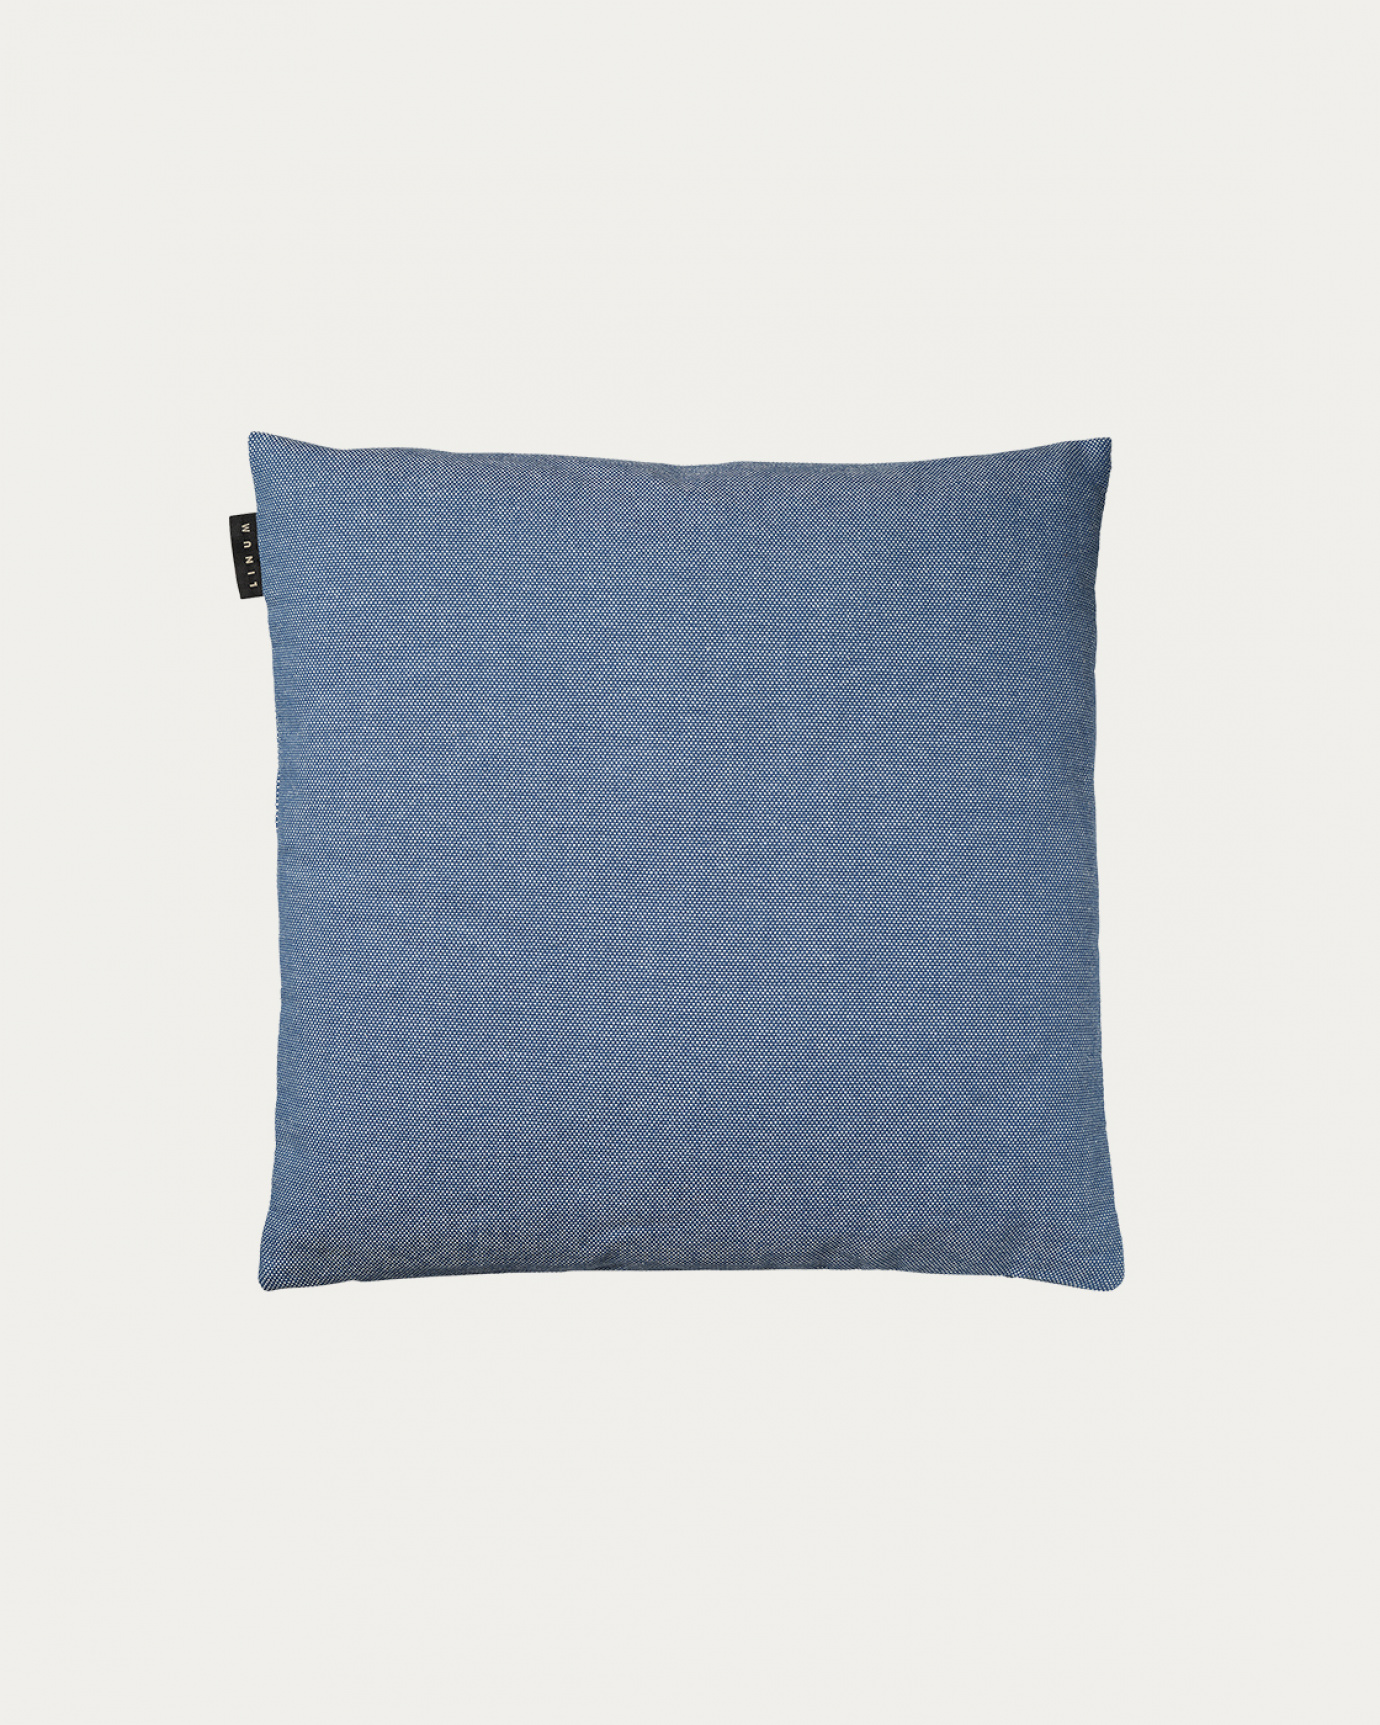 PEPPER Cushion cover 40x40 cm Deep sea blue in the group ASSORTMENT / STANDARD / Cushion covers at LINUM DESIGN (23PEP04000C42)